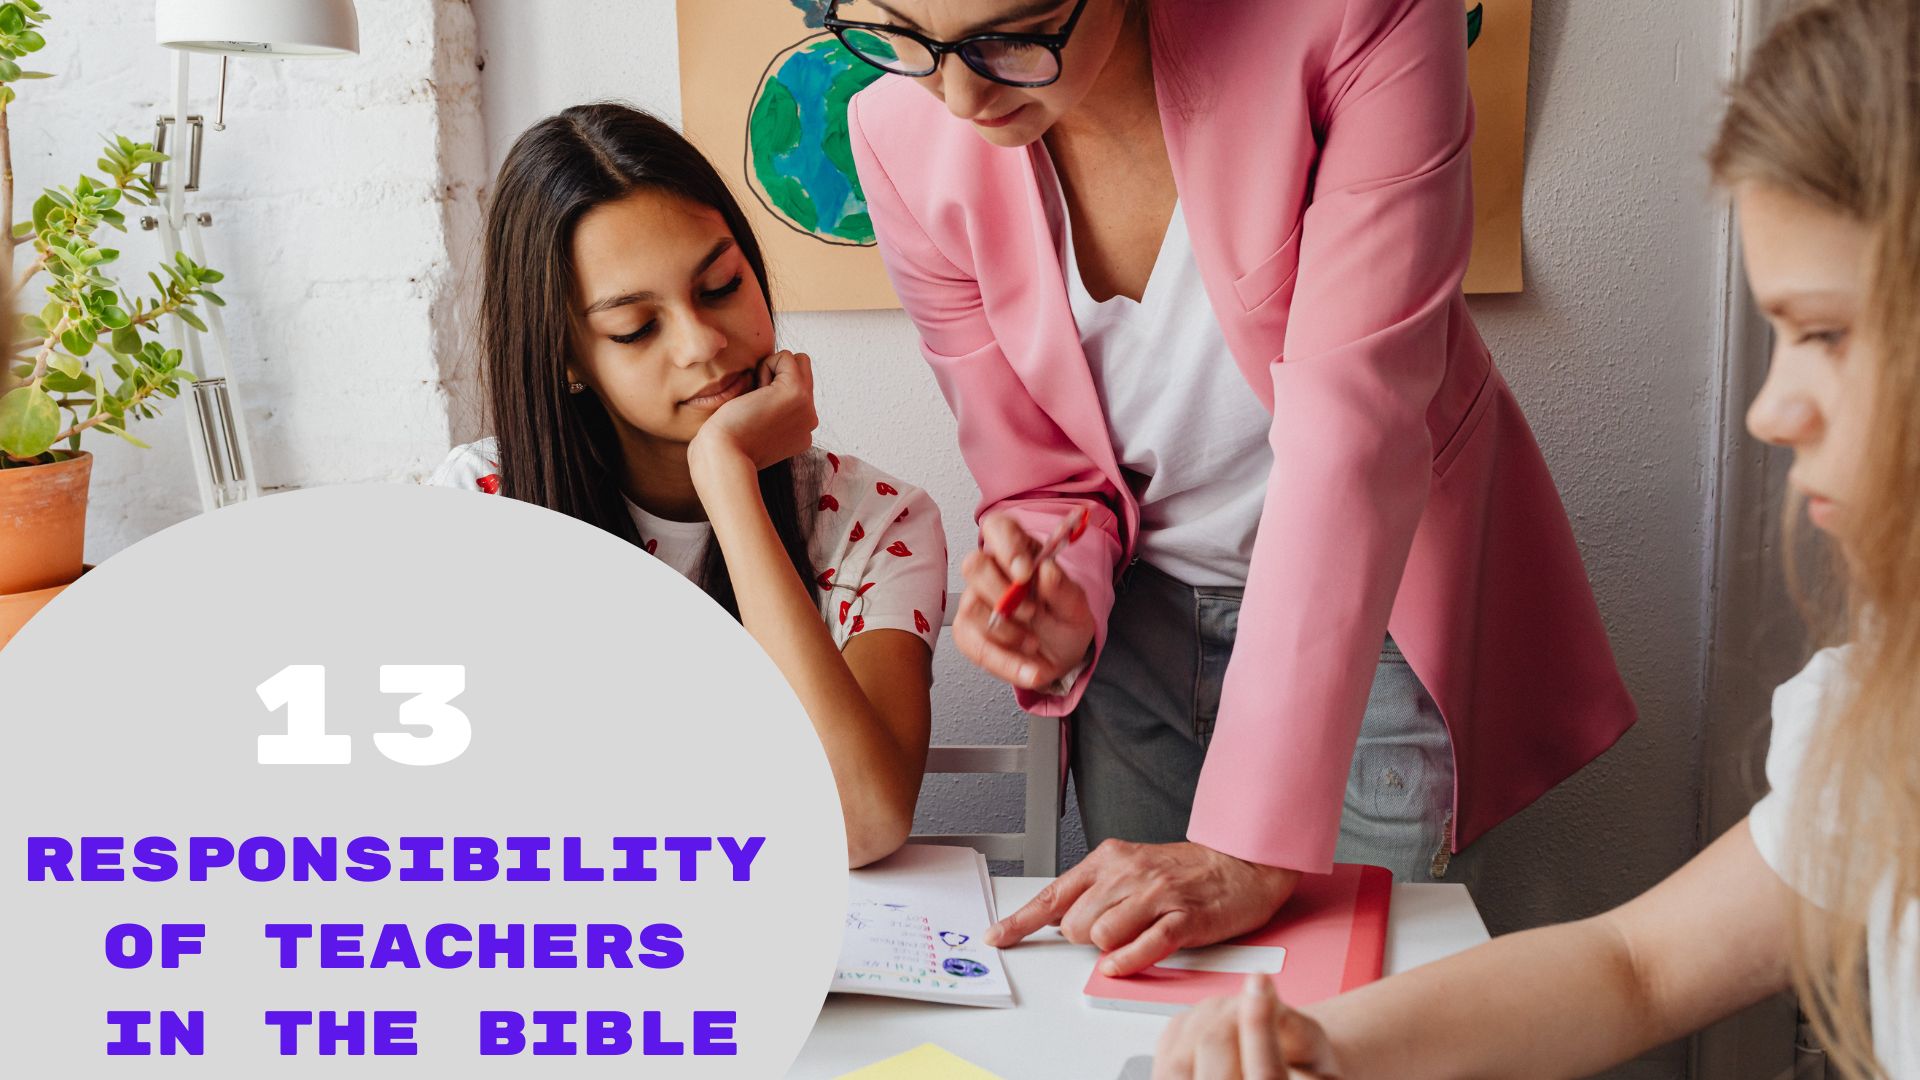 13 Responsibility Of Teachers In The Bible